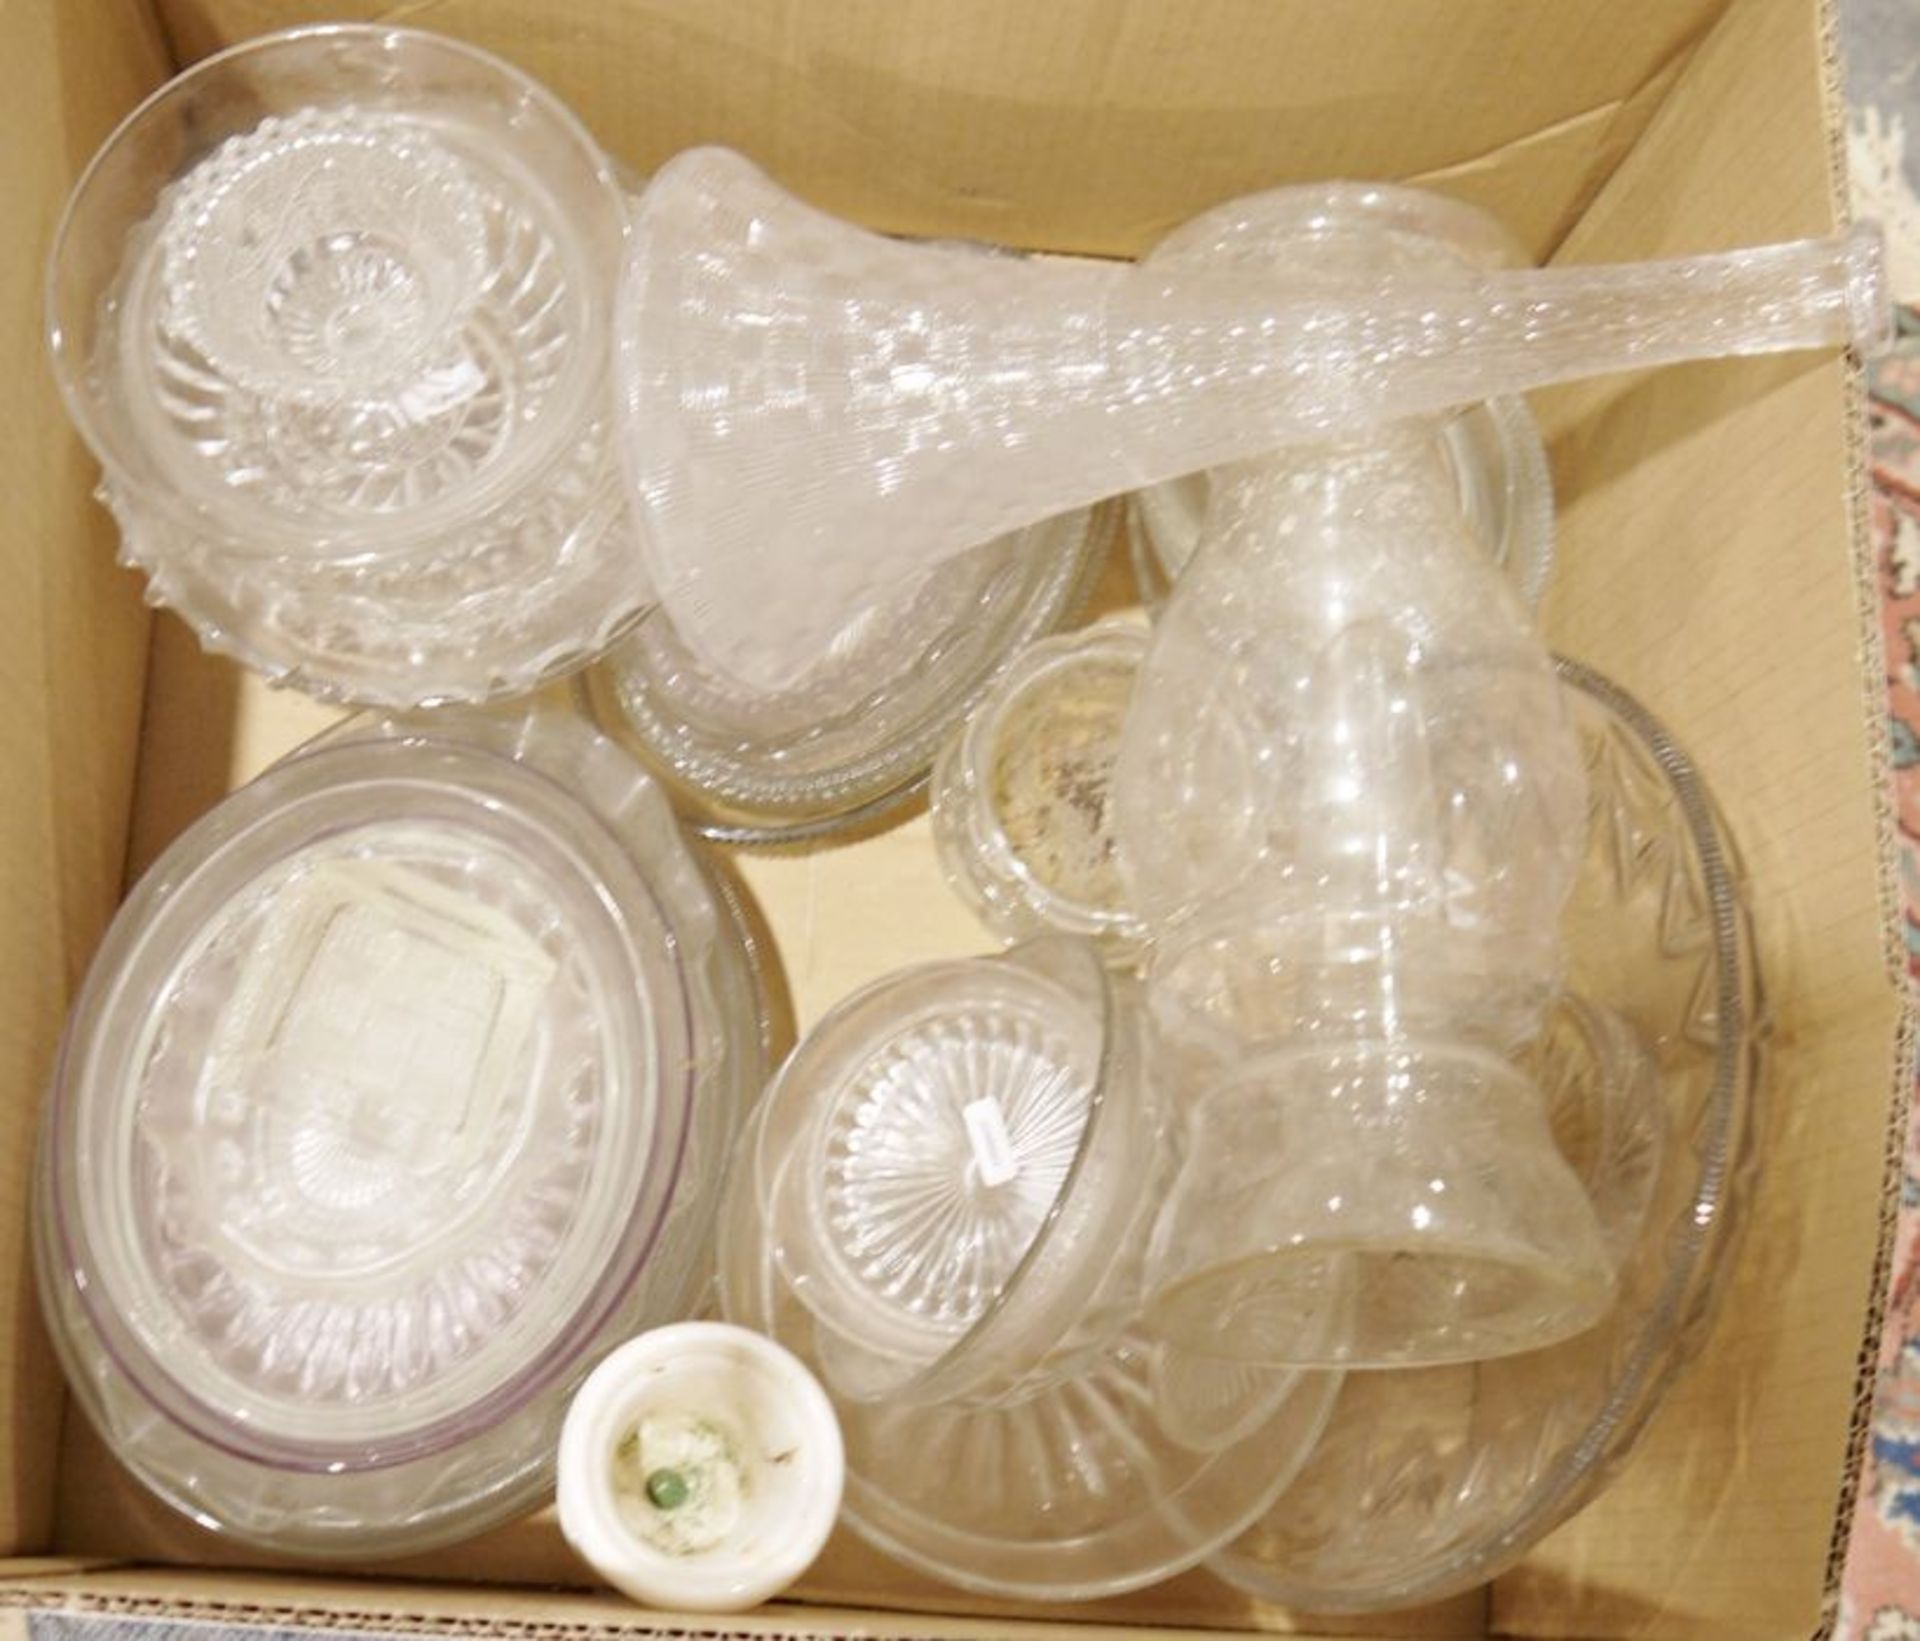 Two boxes of assorted glassware to include vases, bowls, etc